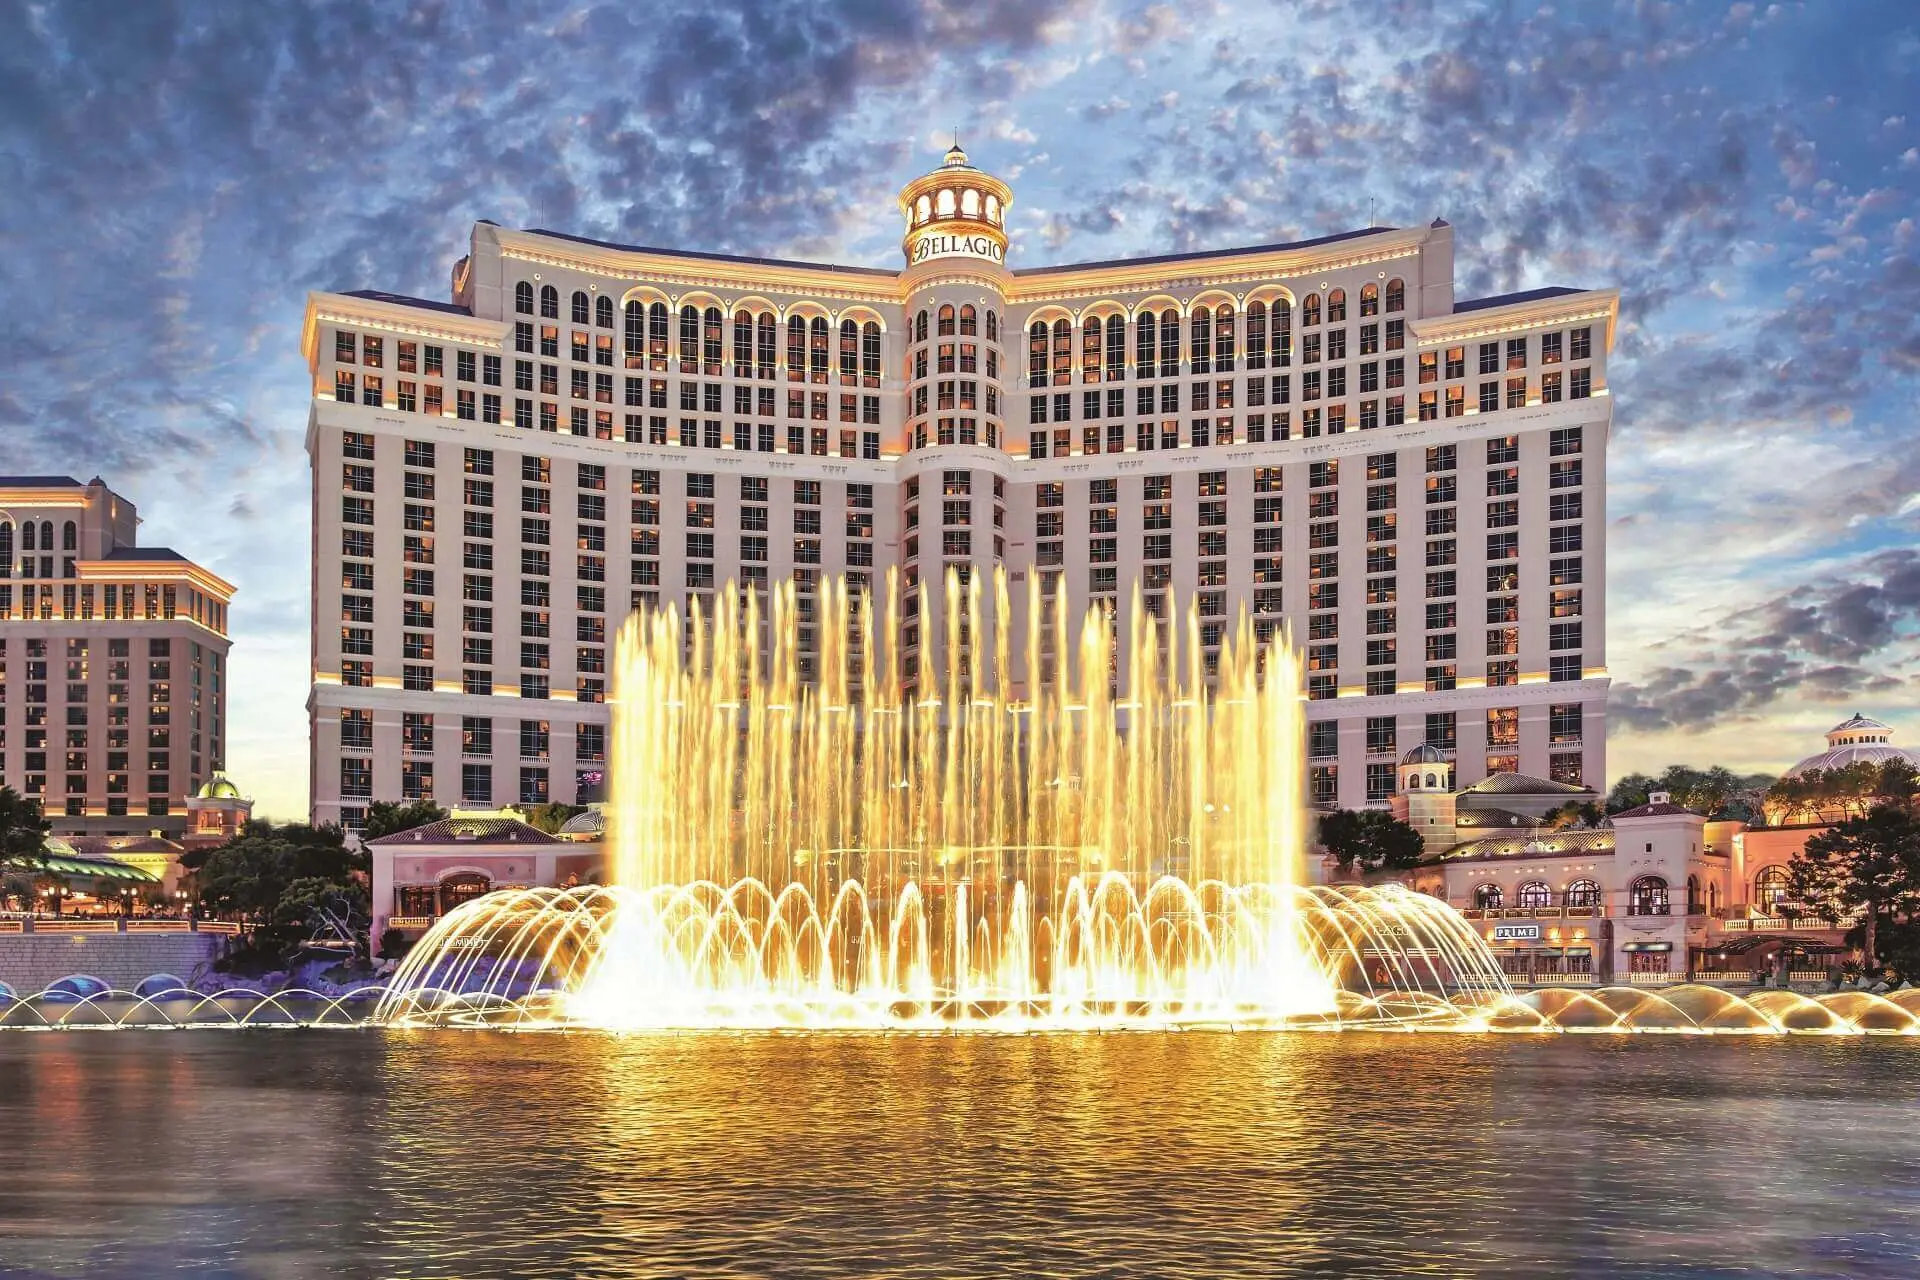 Image of the Bellagio casino and hotel, Las Vegas in front of the famous dancing fountain at dusk